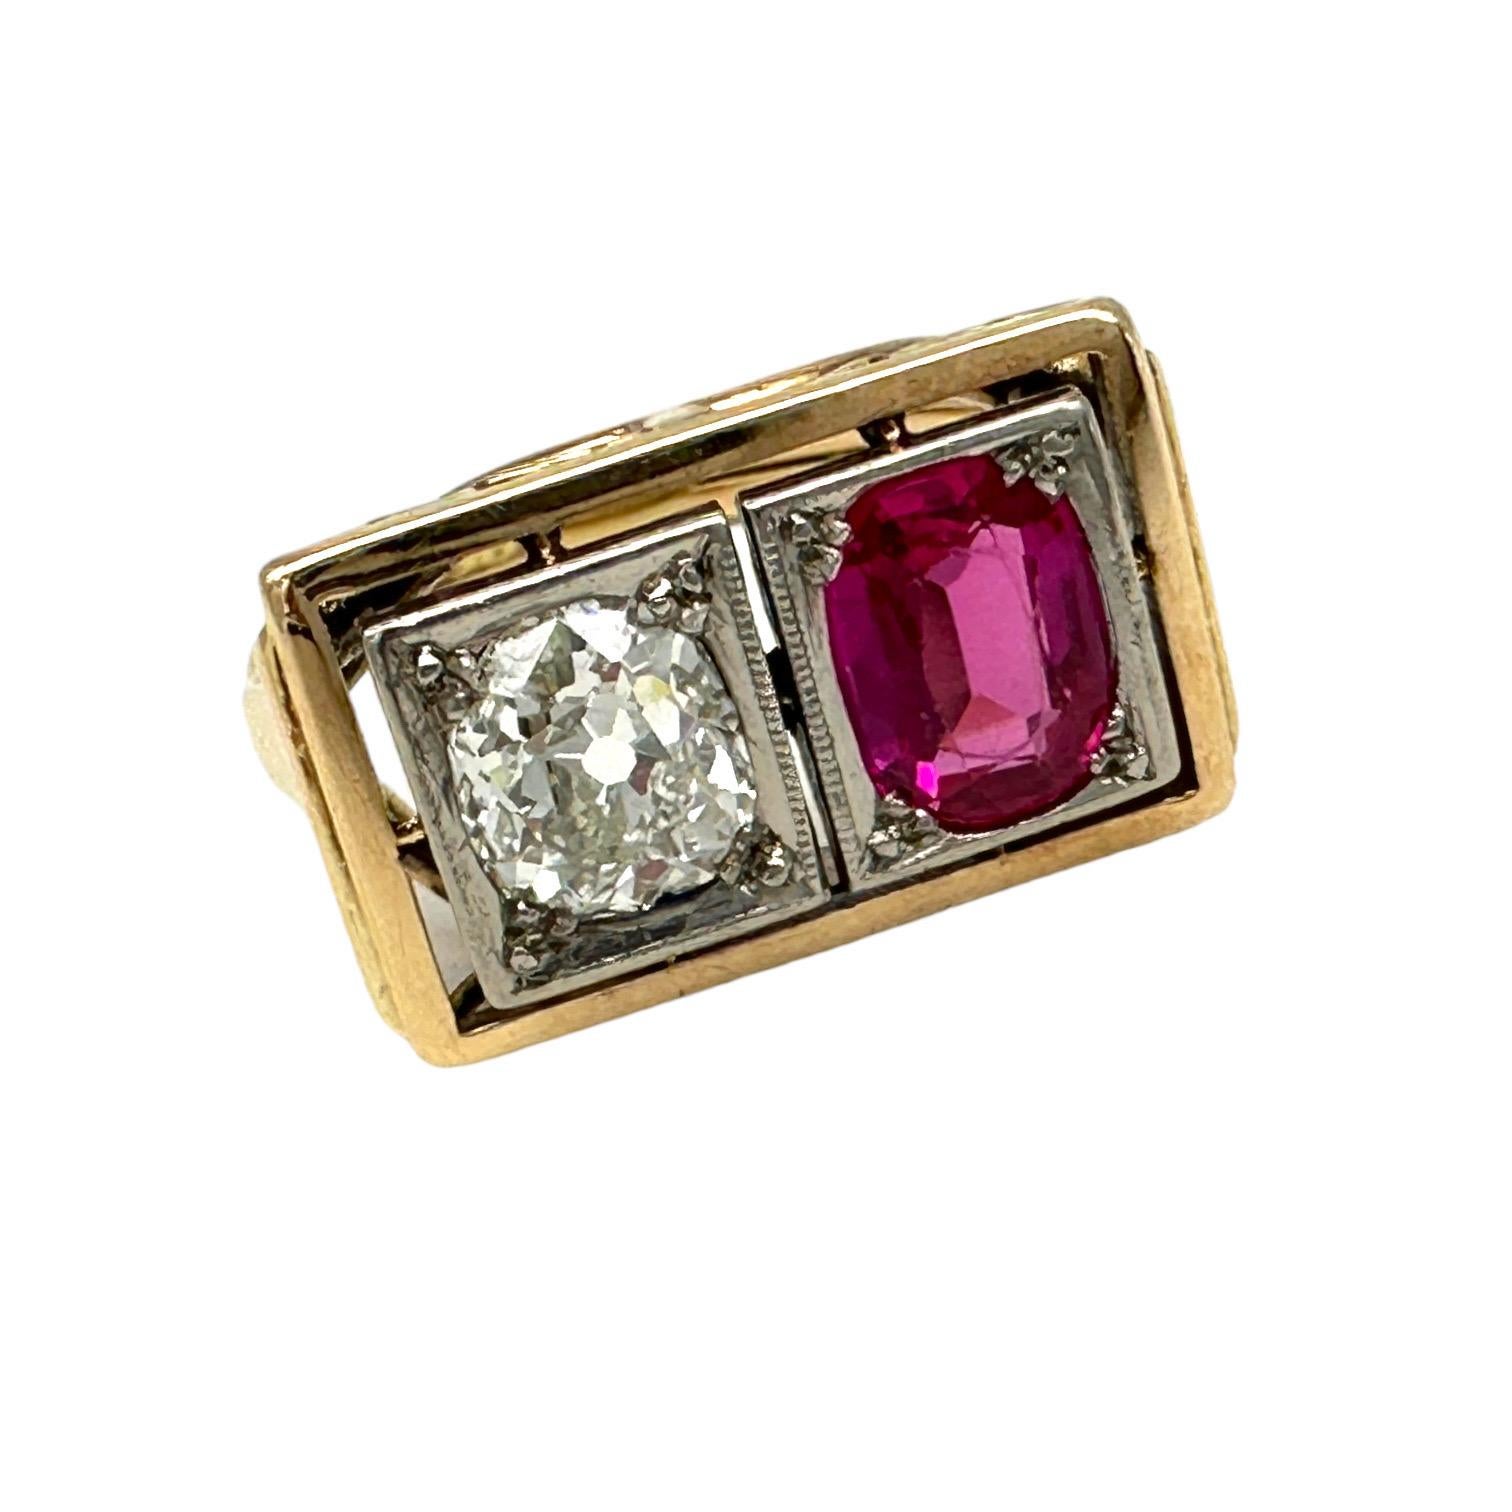 Old Mine Cut 1800's Art Deco Old Miners Cut Diamond & Ruby 2.20 Carat Ring For Sale